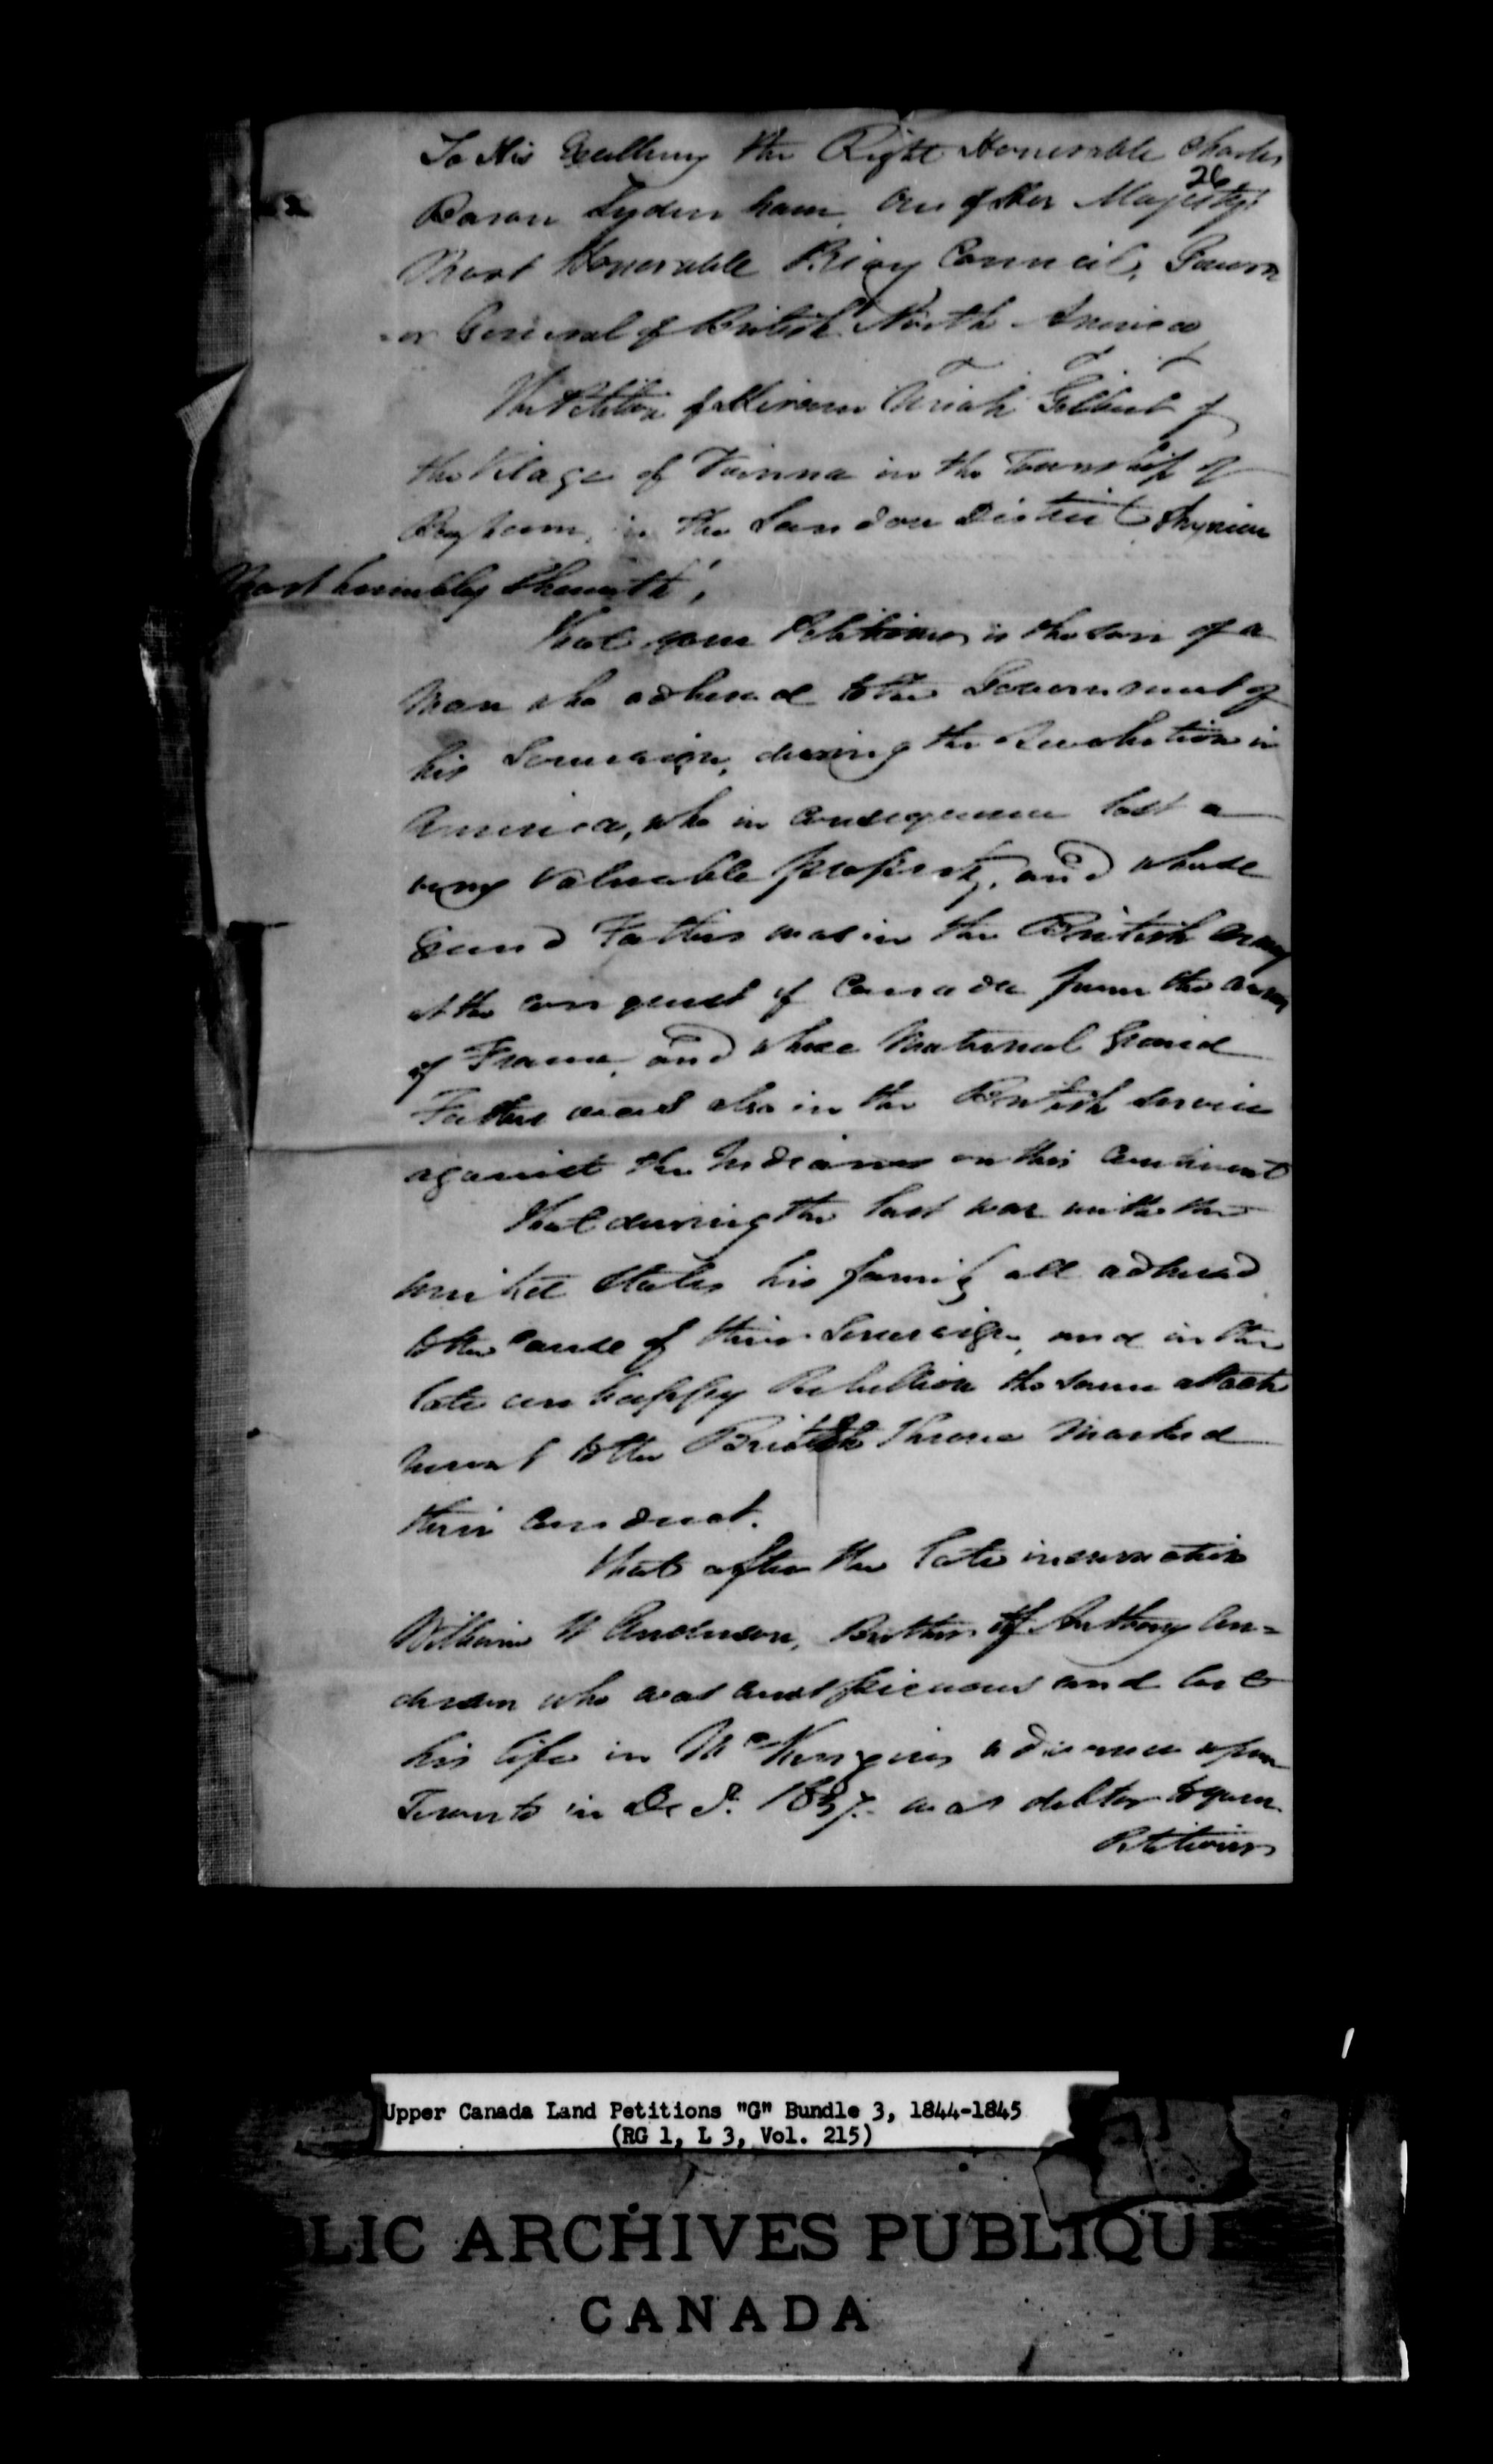 Title: Upper Canada Land Petitions (1763-1865) - Mikan Number: 205131 - Microform: c-2037